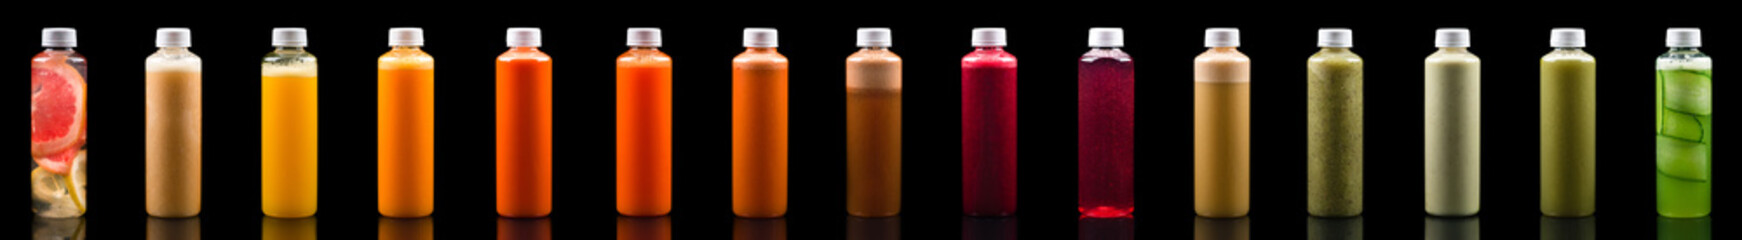 Various fresh vegetable detox juices, colourful smoothies in the bottle set